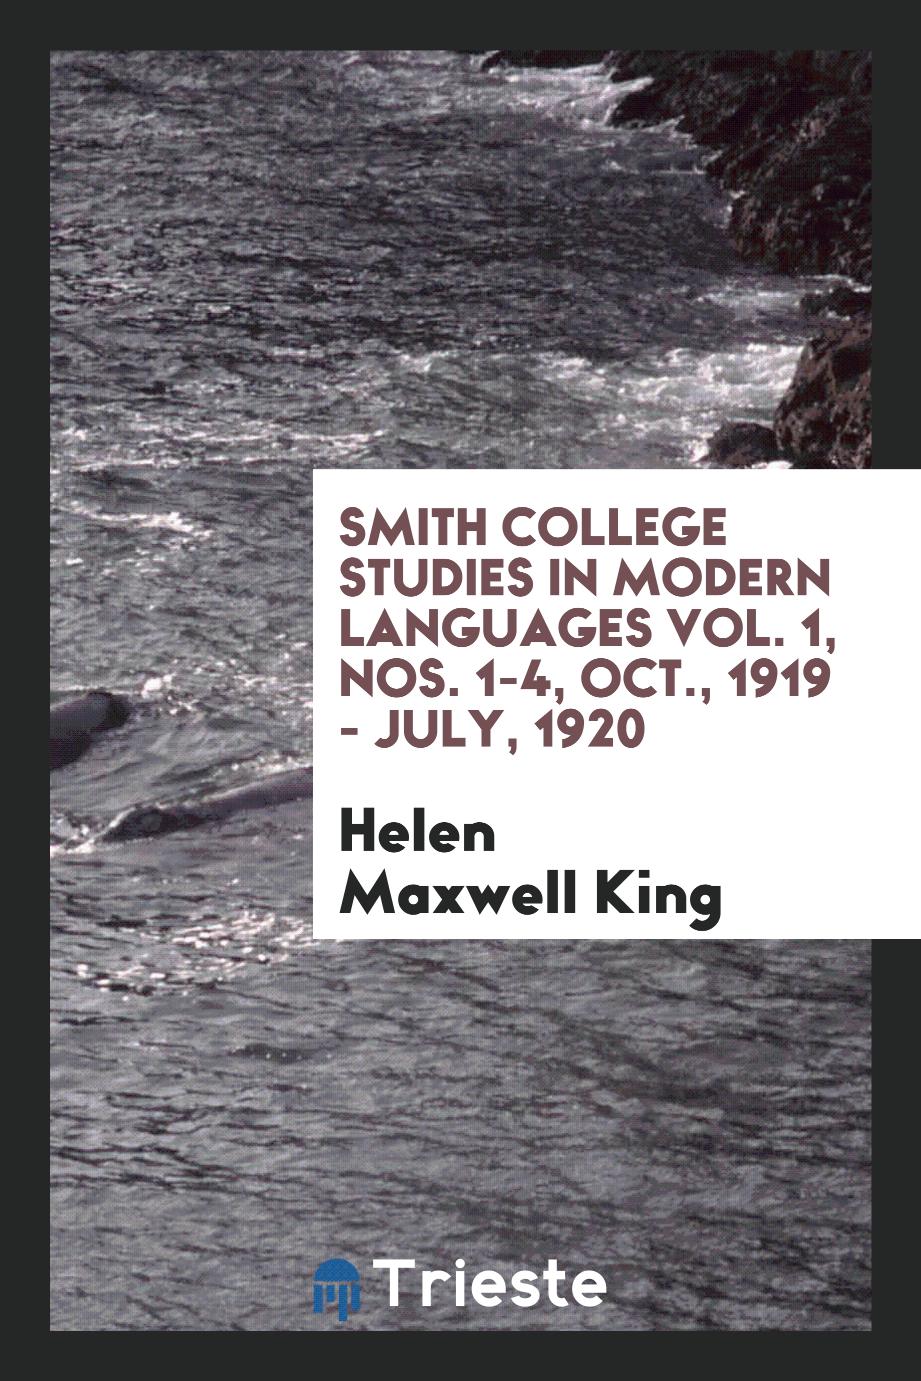 Smith College studies in modern languages Vol. 1, Nos. 1-4, Oct., 1919 - July, 1920